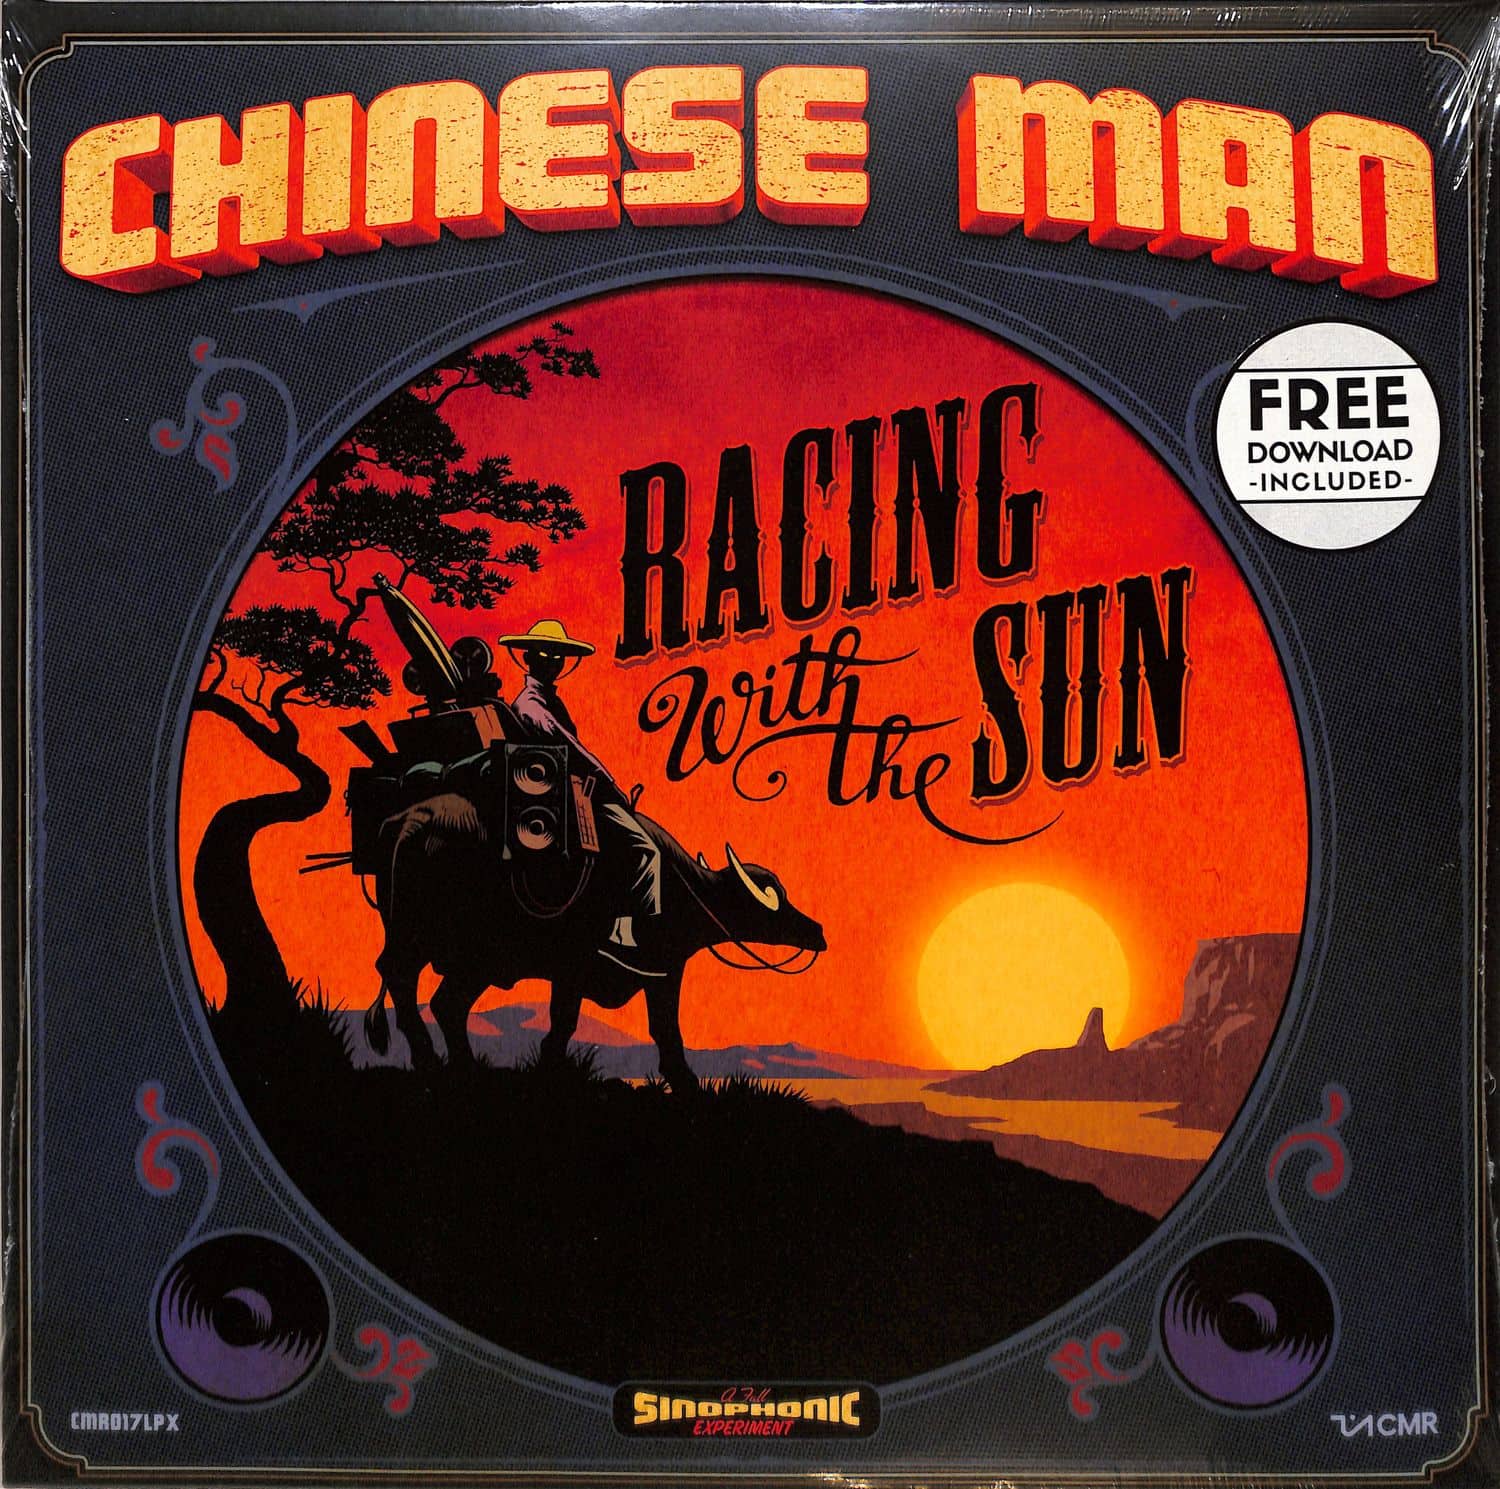 Chinese Man - RACING WITH THE SUN 